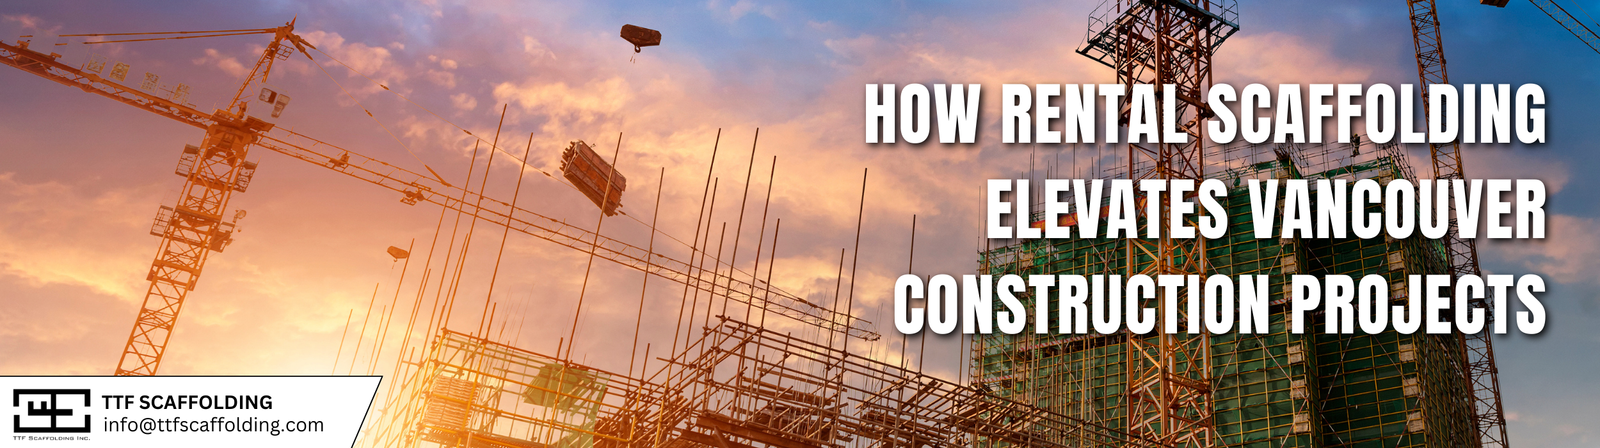 How Rental Scaffolding Elevates Vancouver Construction Projects